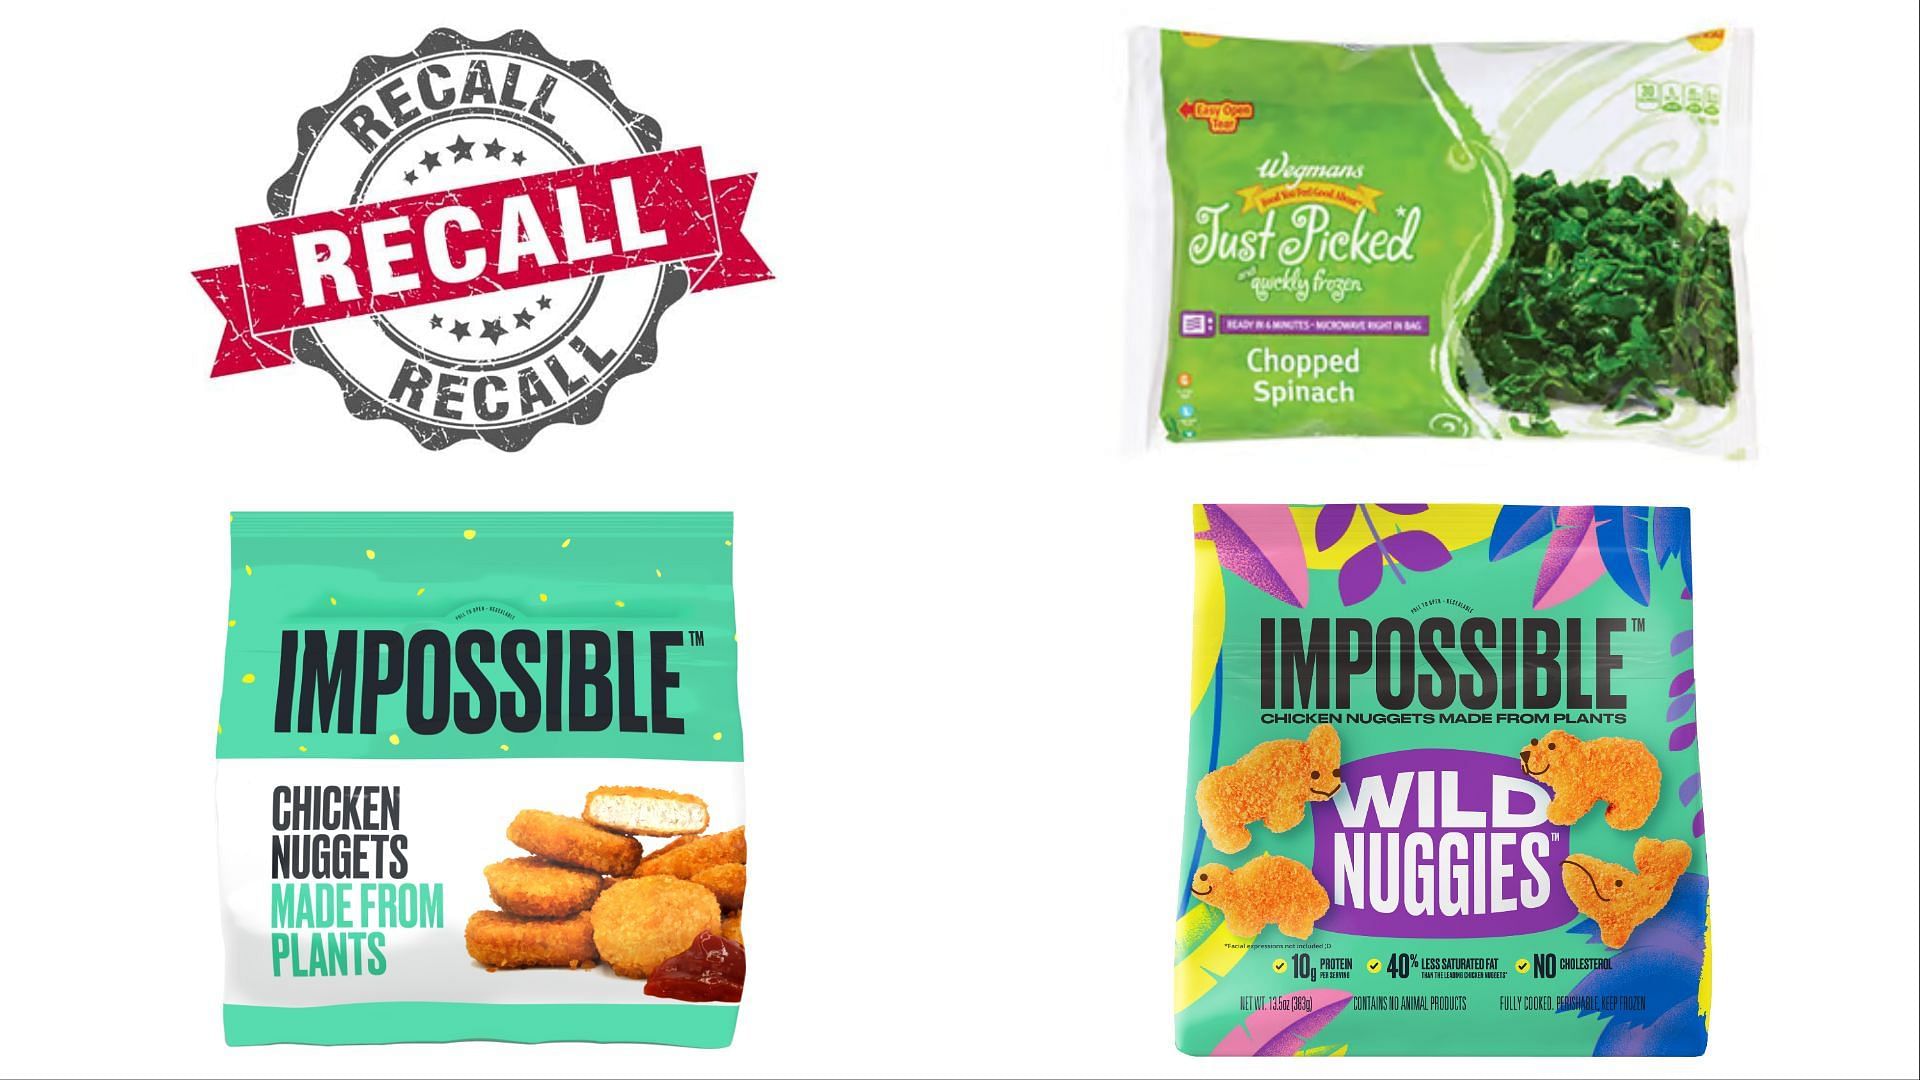 Wegmans Food Markets issued a recall for Frozen Spinach, Impossible Chicken Nuggets &amp; Wild Nuggies over contamination concerns (Image via Wegmans Food Markets)